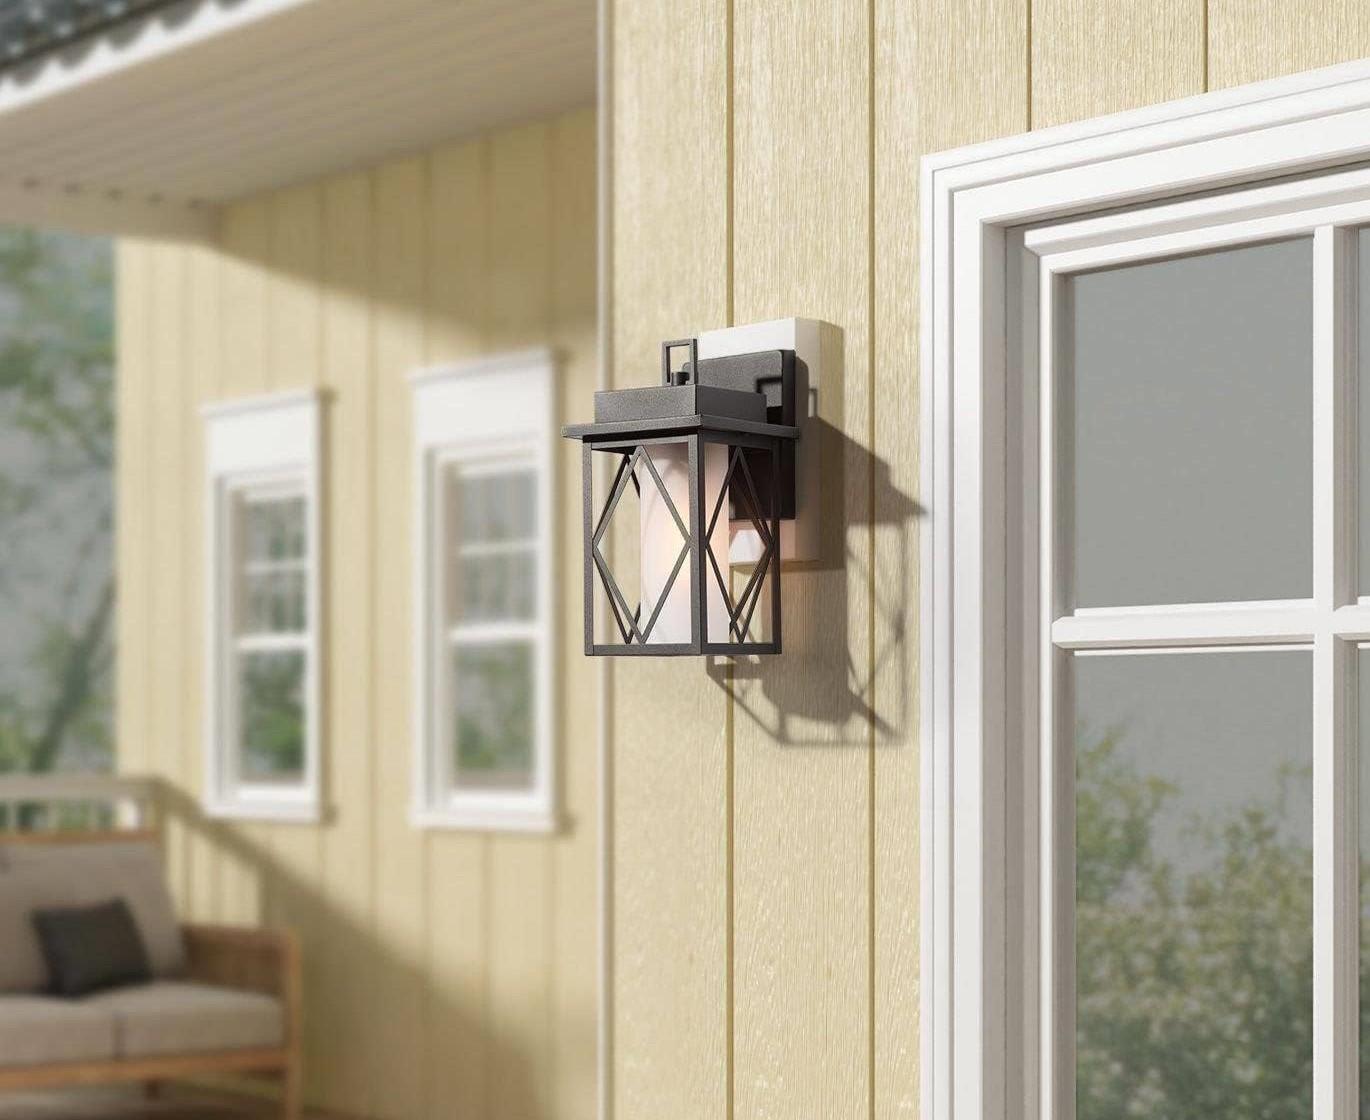 How High Should A Porch Light Be Mounted